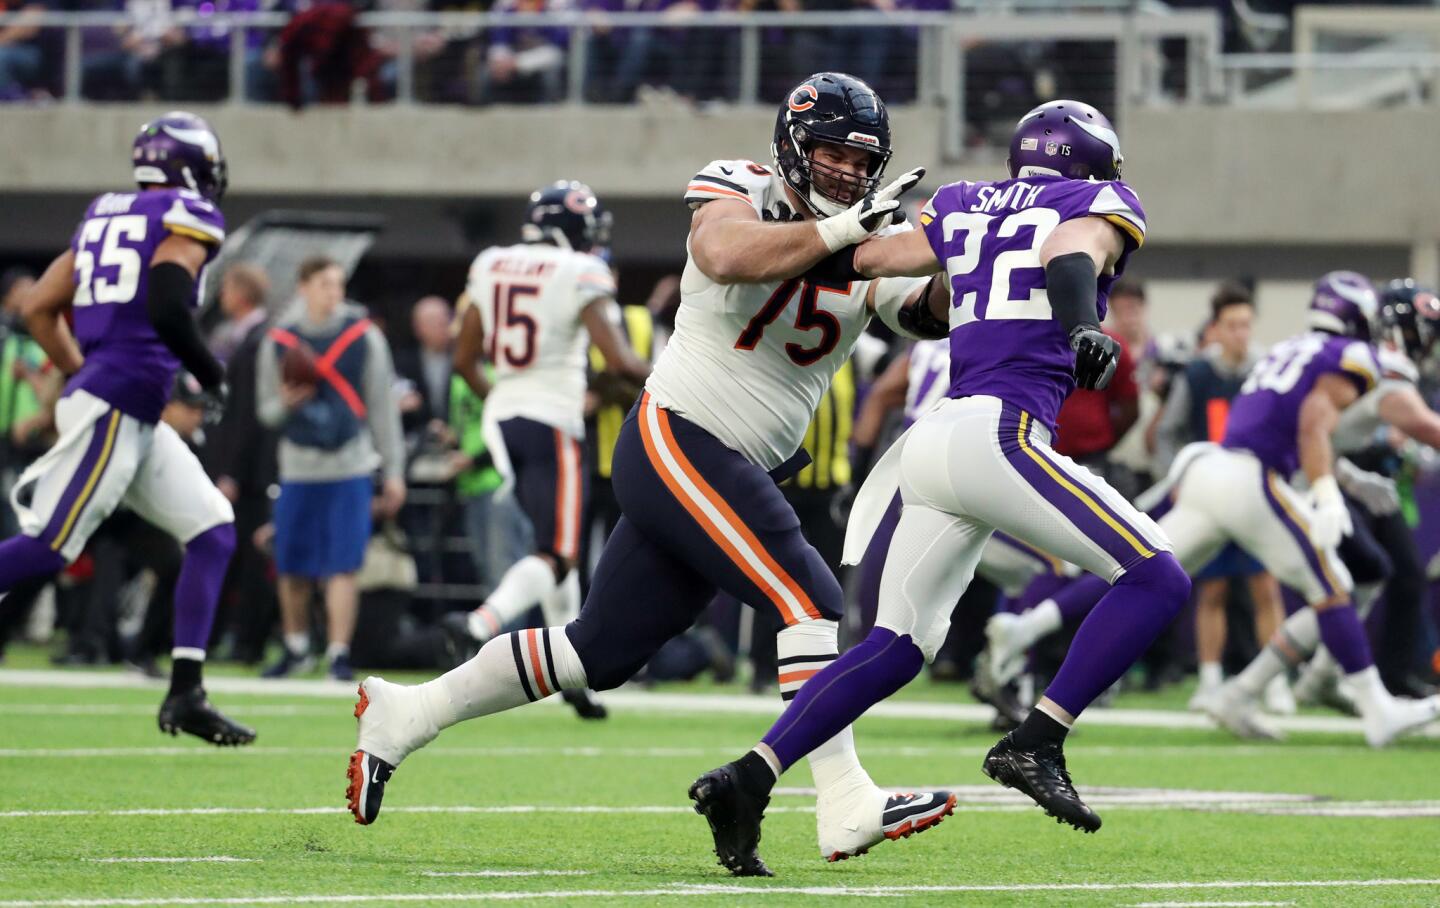 Bears offensive guard Kyle Long blocks Vikings free safety Harrison Smith in the first quarter on Dec. 30, 2018, in Minneapolis.